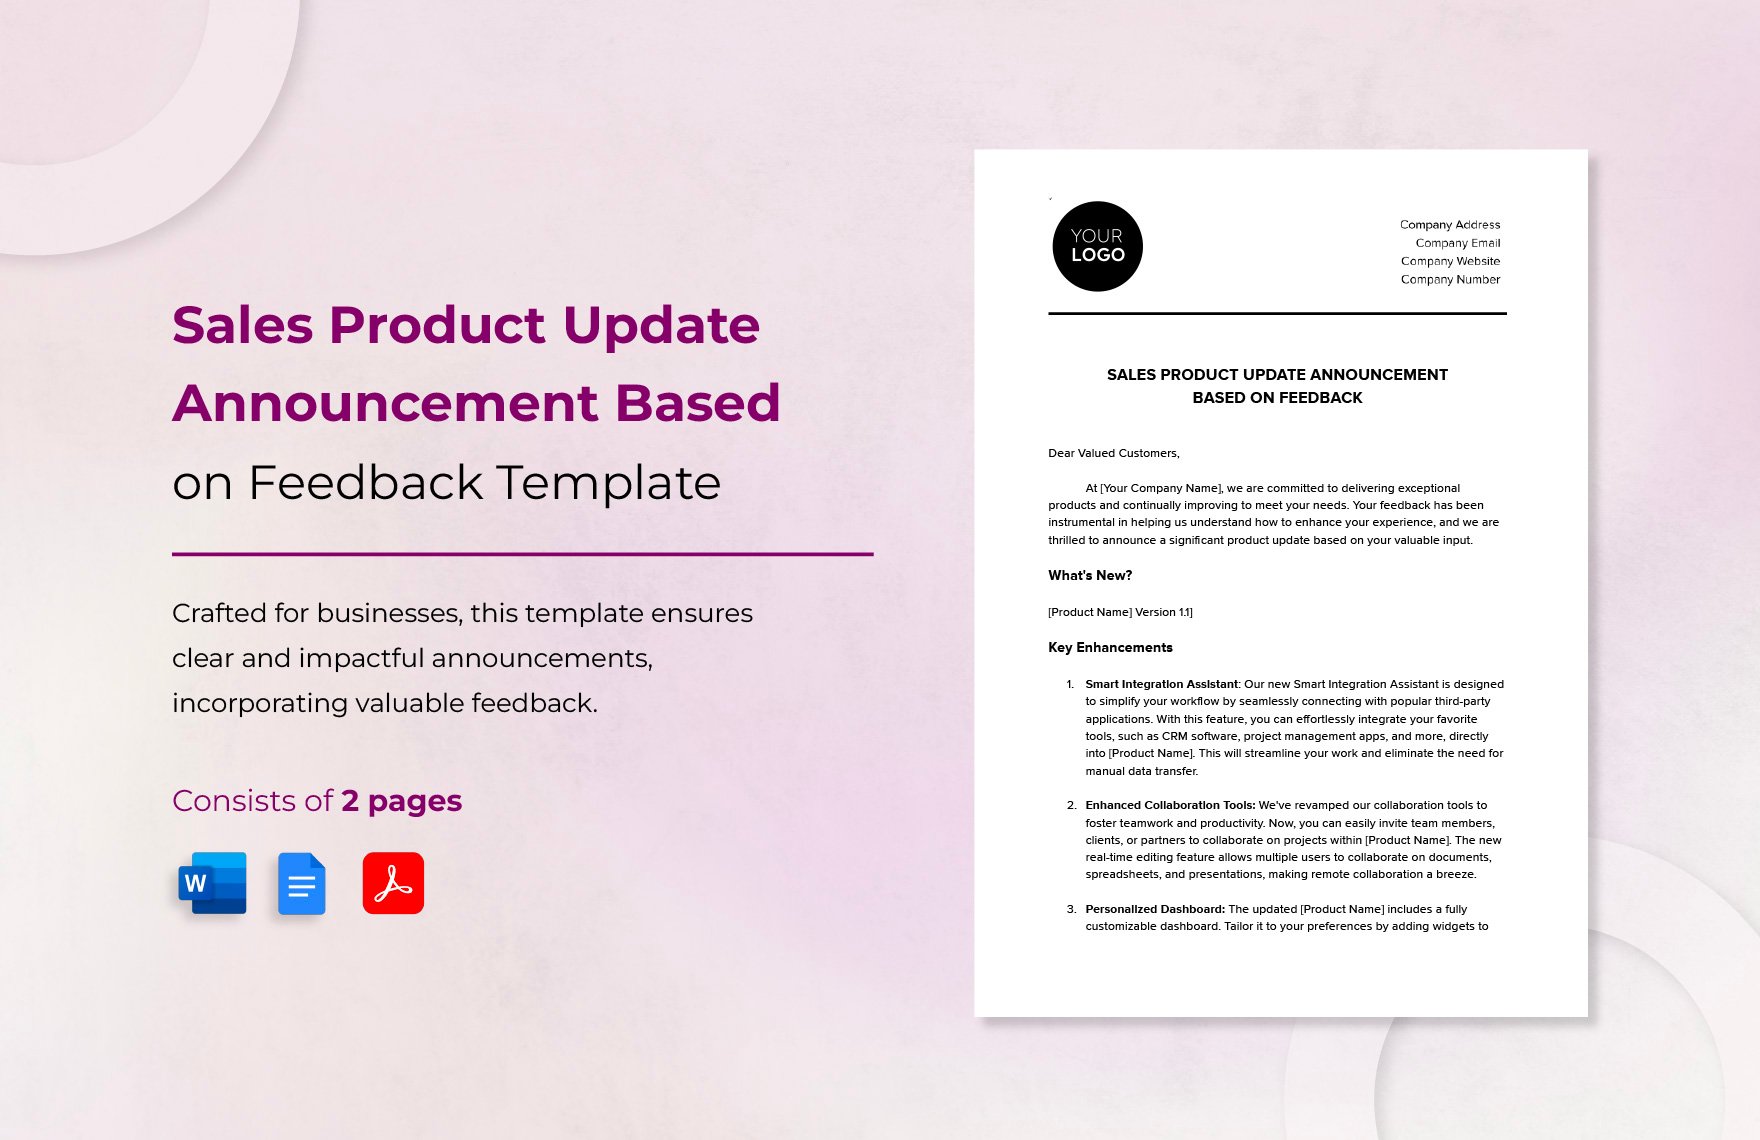 Sales Product Update Announcement Based on Feedback Template in Word, Google Docs, PDF